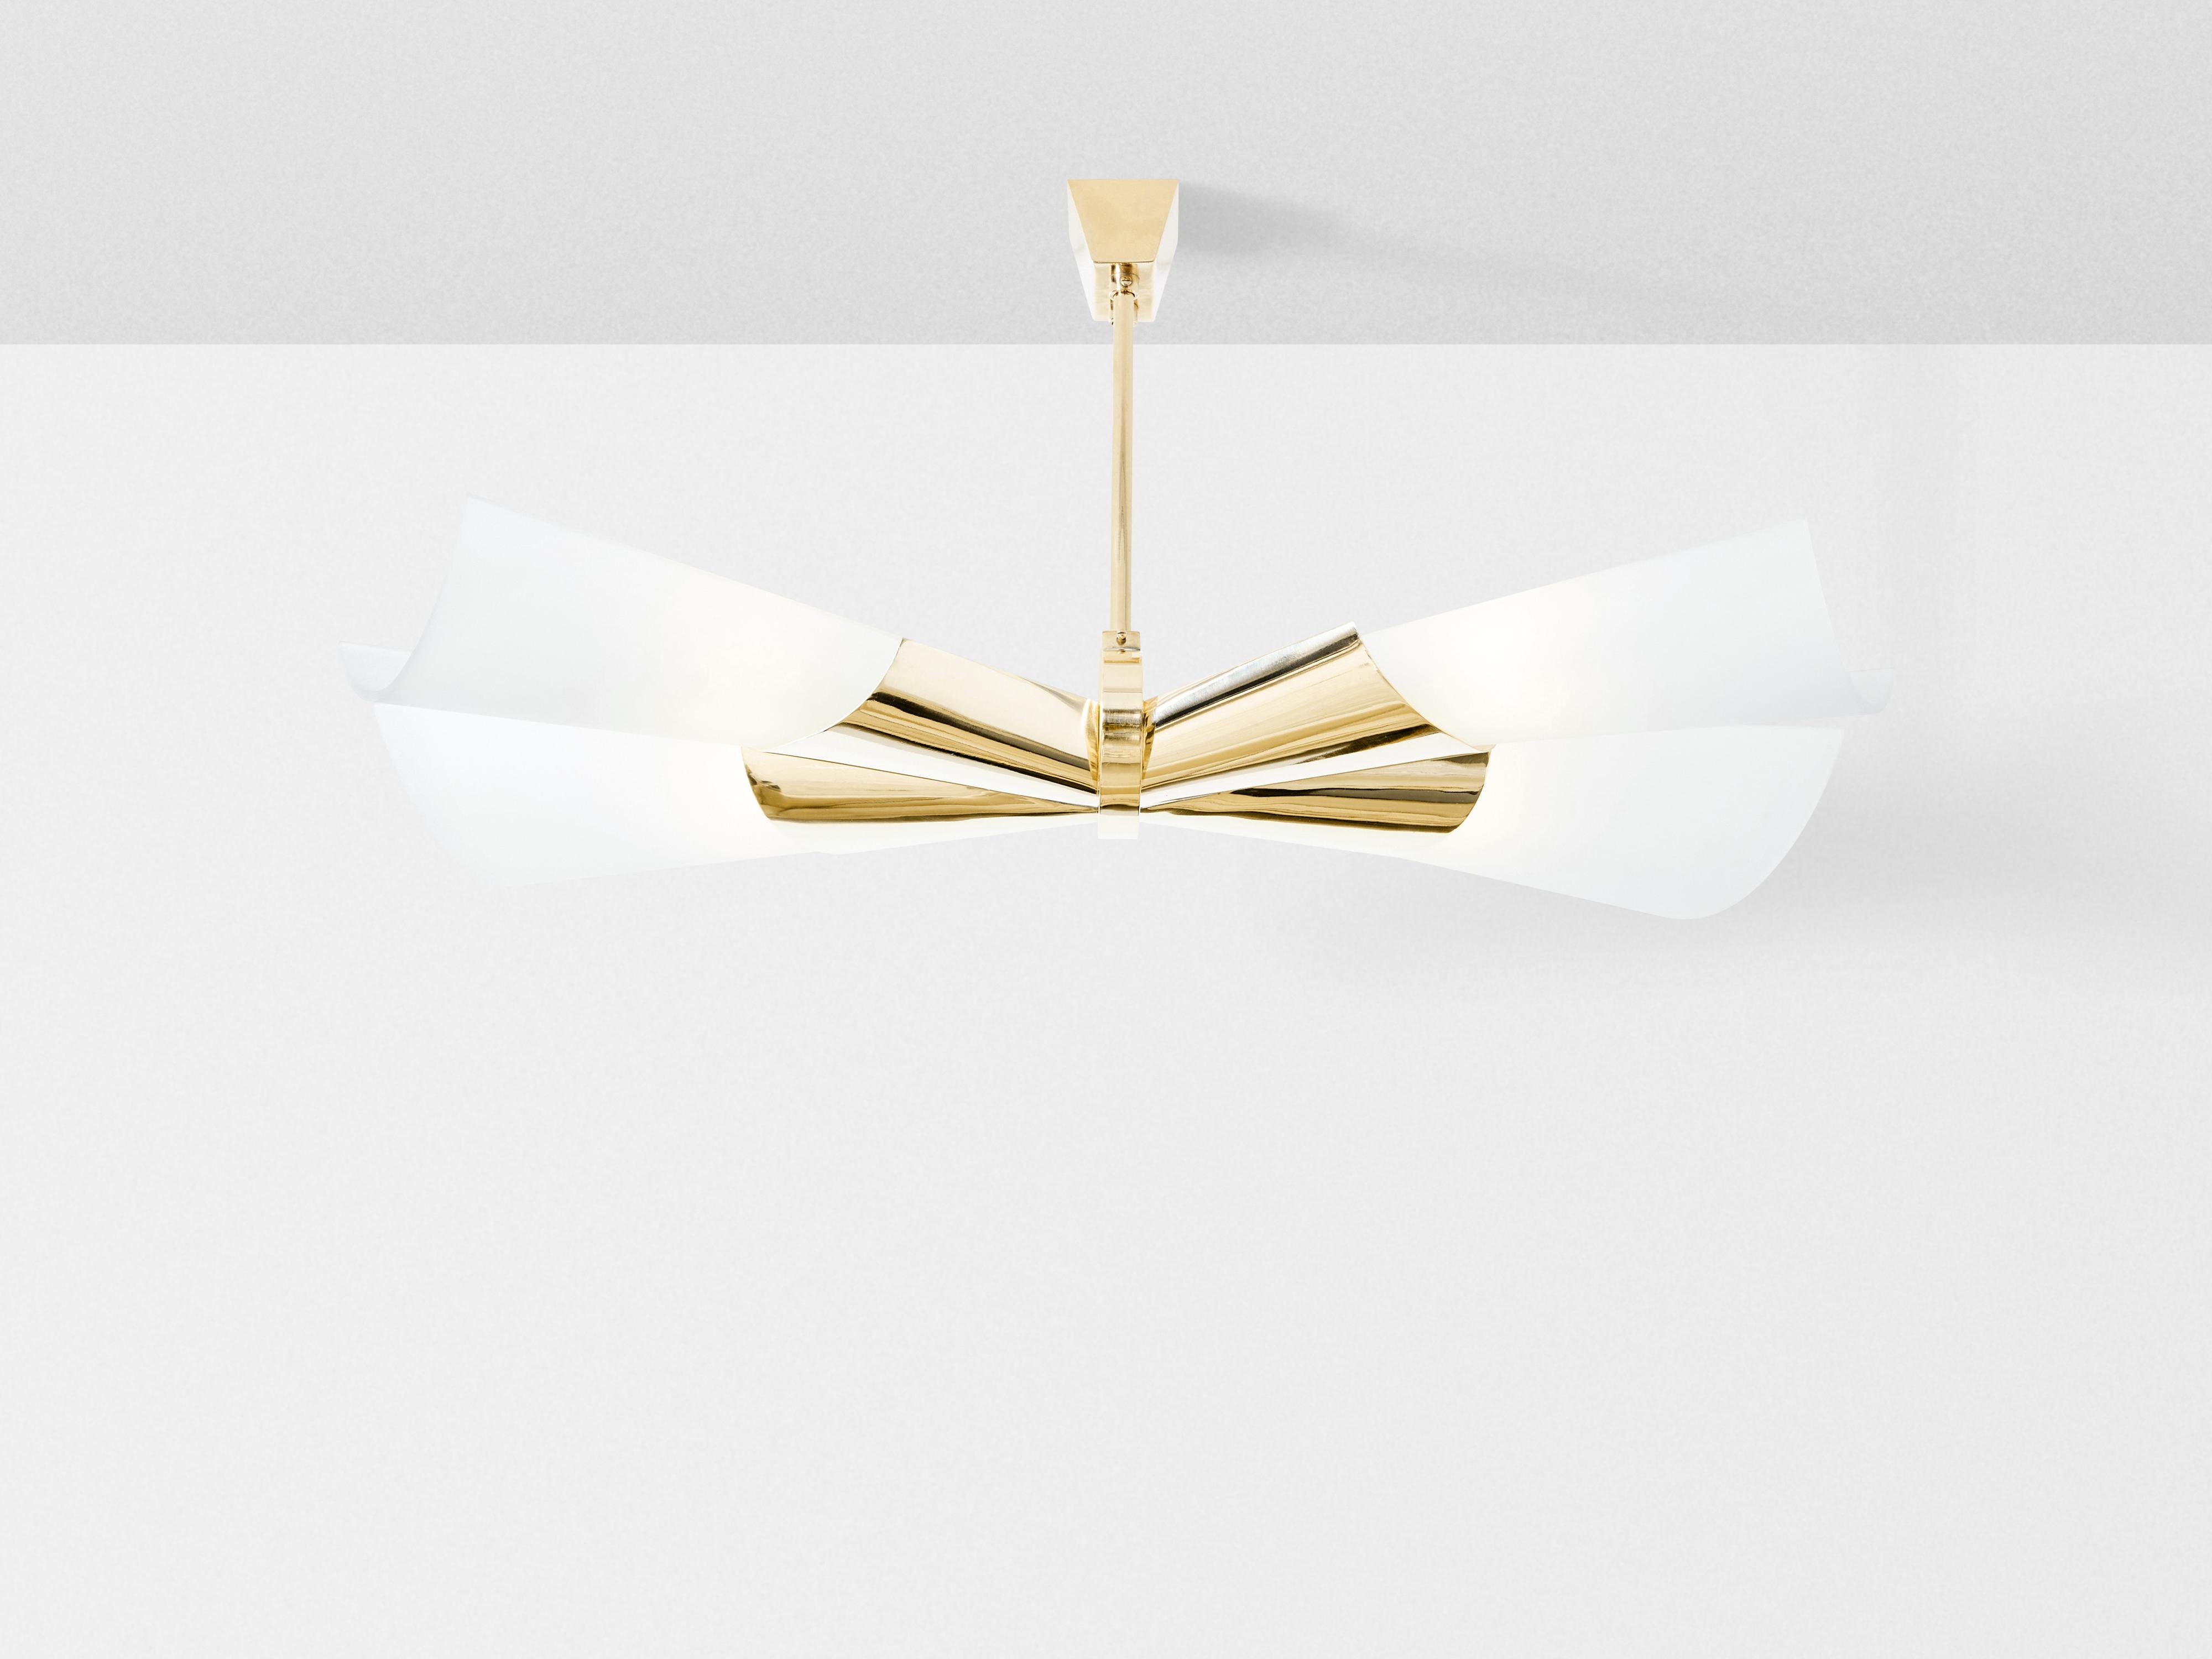 This brass and opal glass chandelier, designed by Max Ingrand for the iconic Italian lighting manufacturer Fontana Arte, dates back to 1955. Crafted with noble materials and clean lines, this piece reminiscent of a butterfly bowtie epitomises